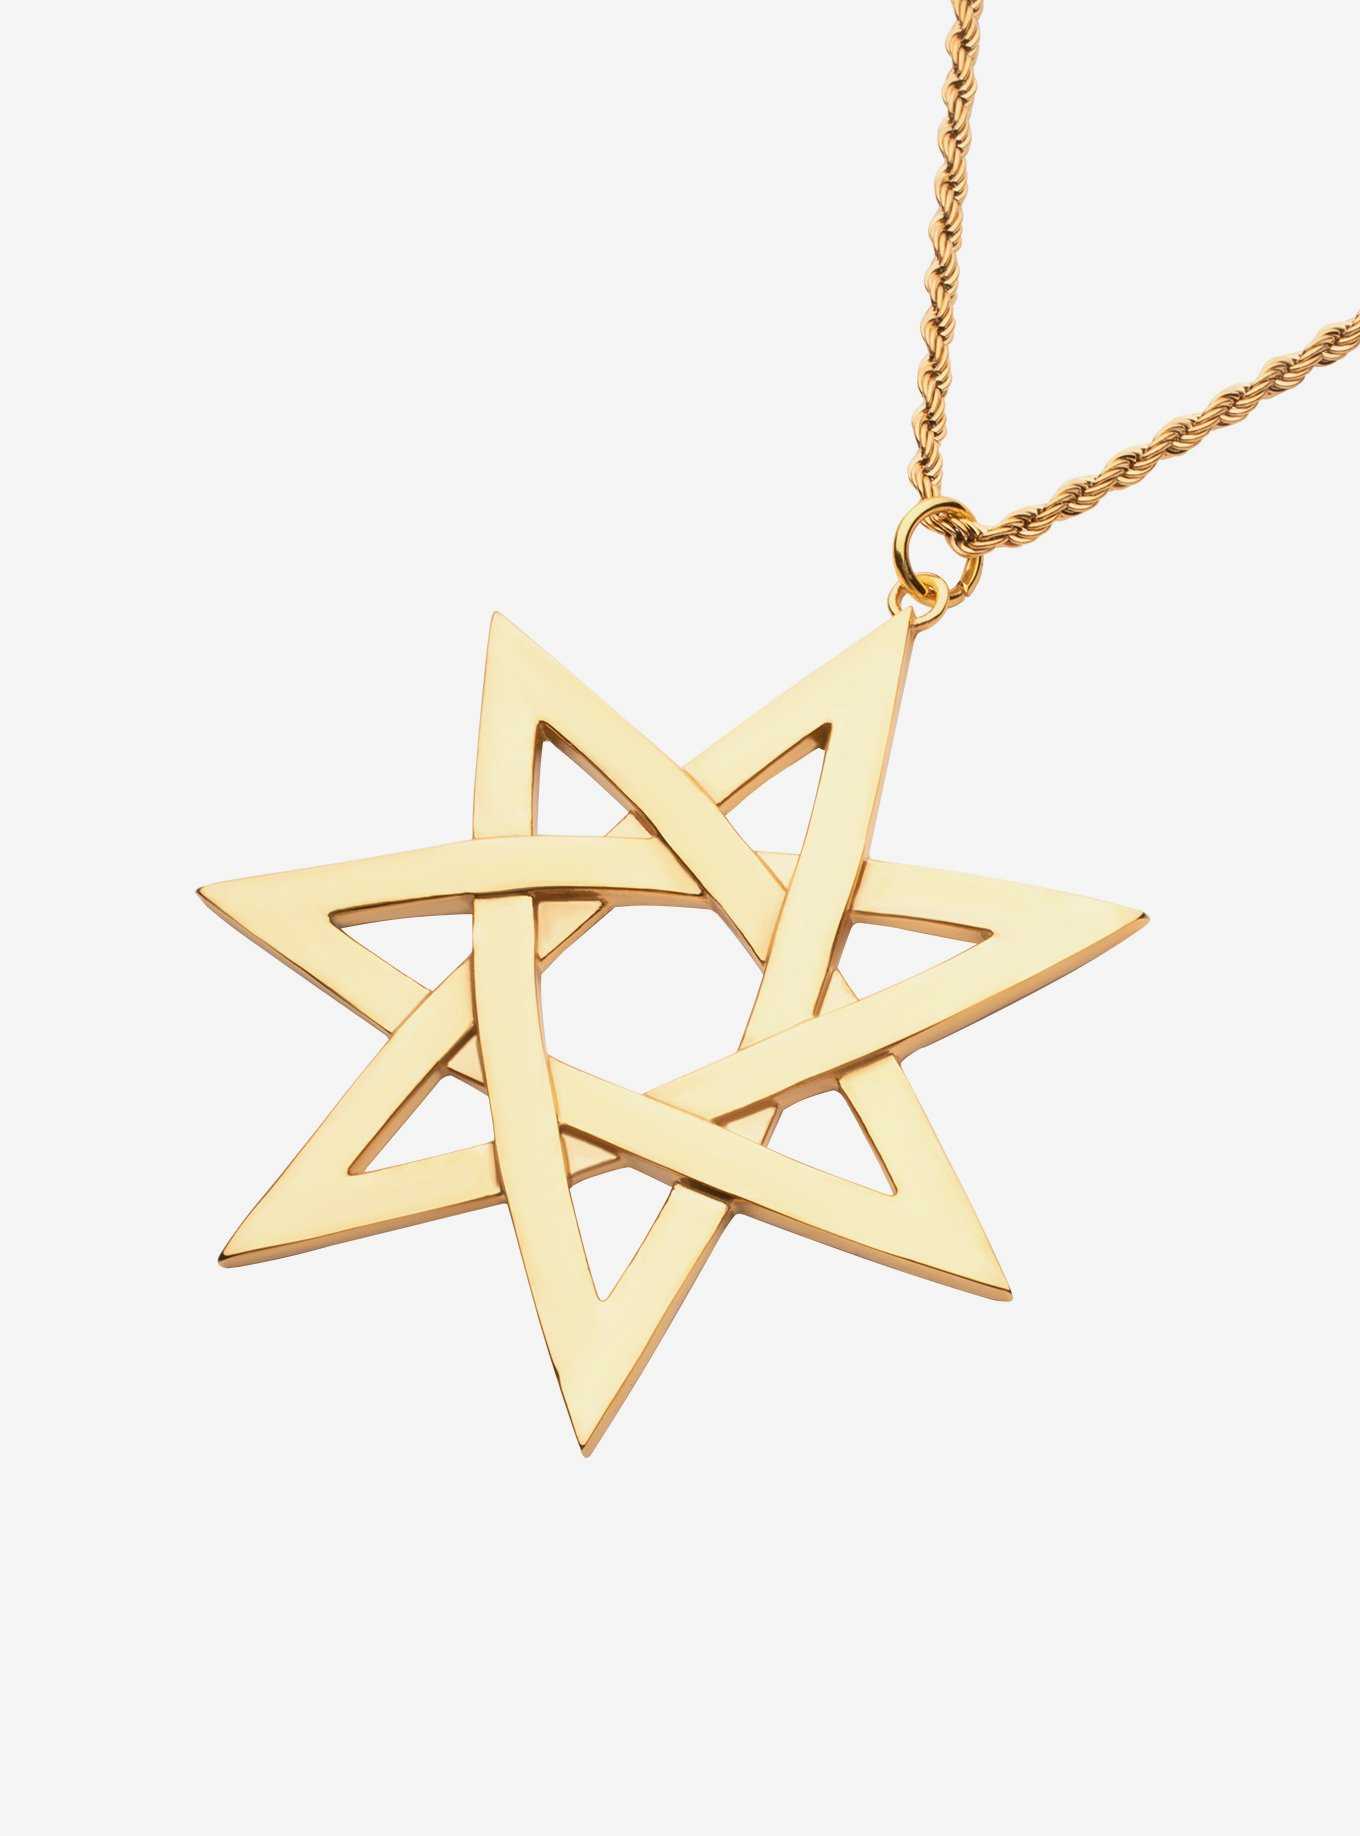 House of the Dragon Alicent 7 Pointed Star Necklace, , hi-res